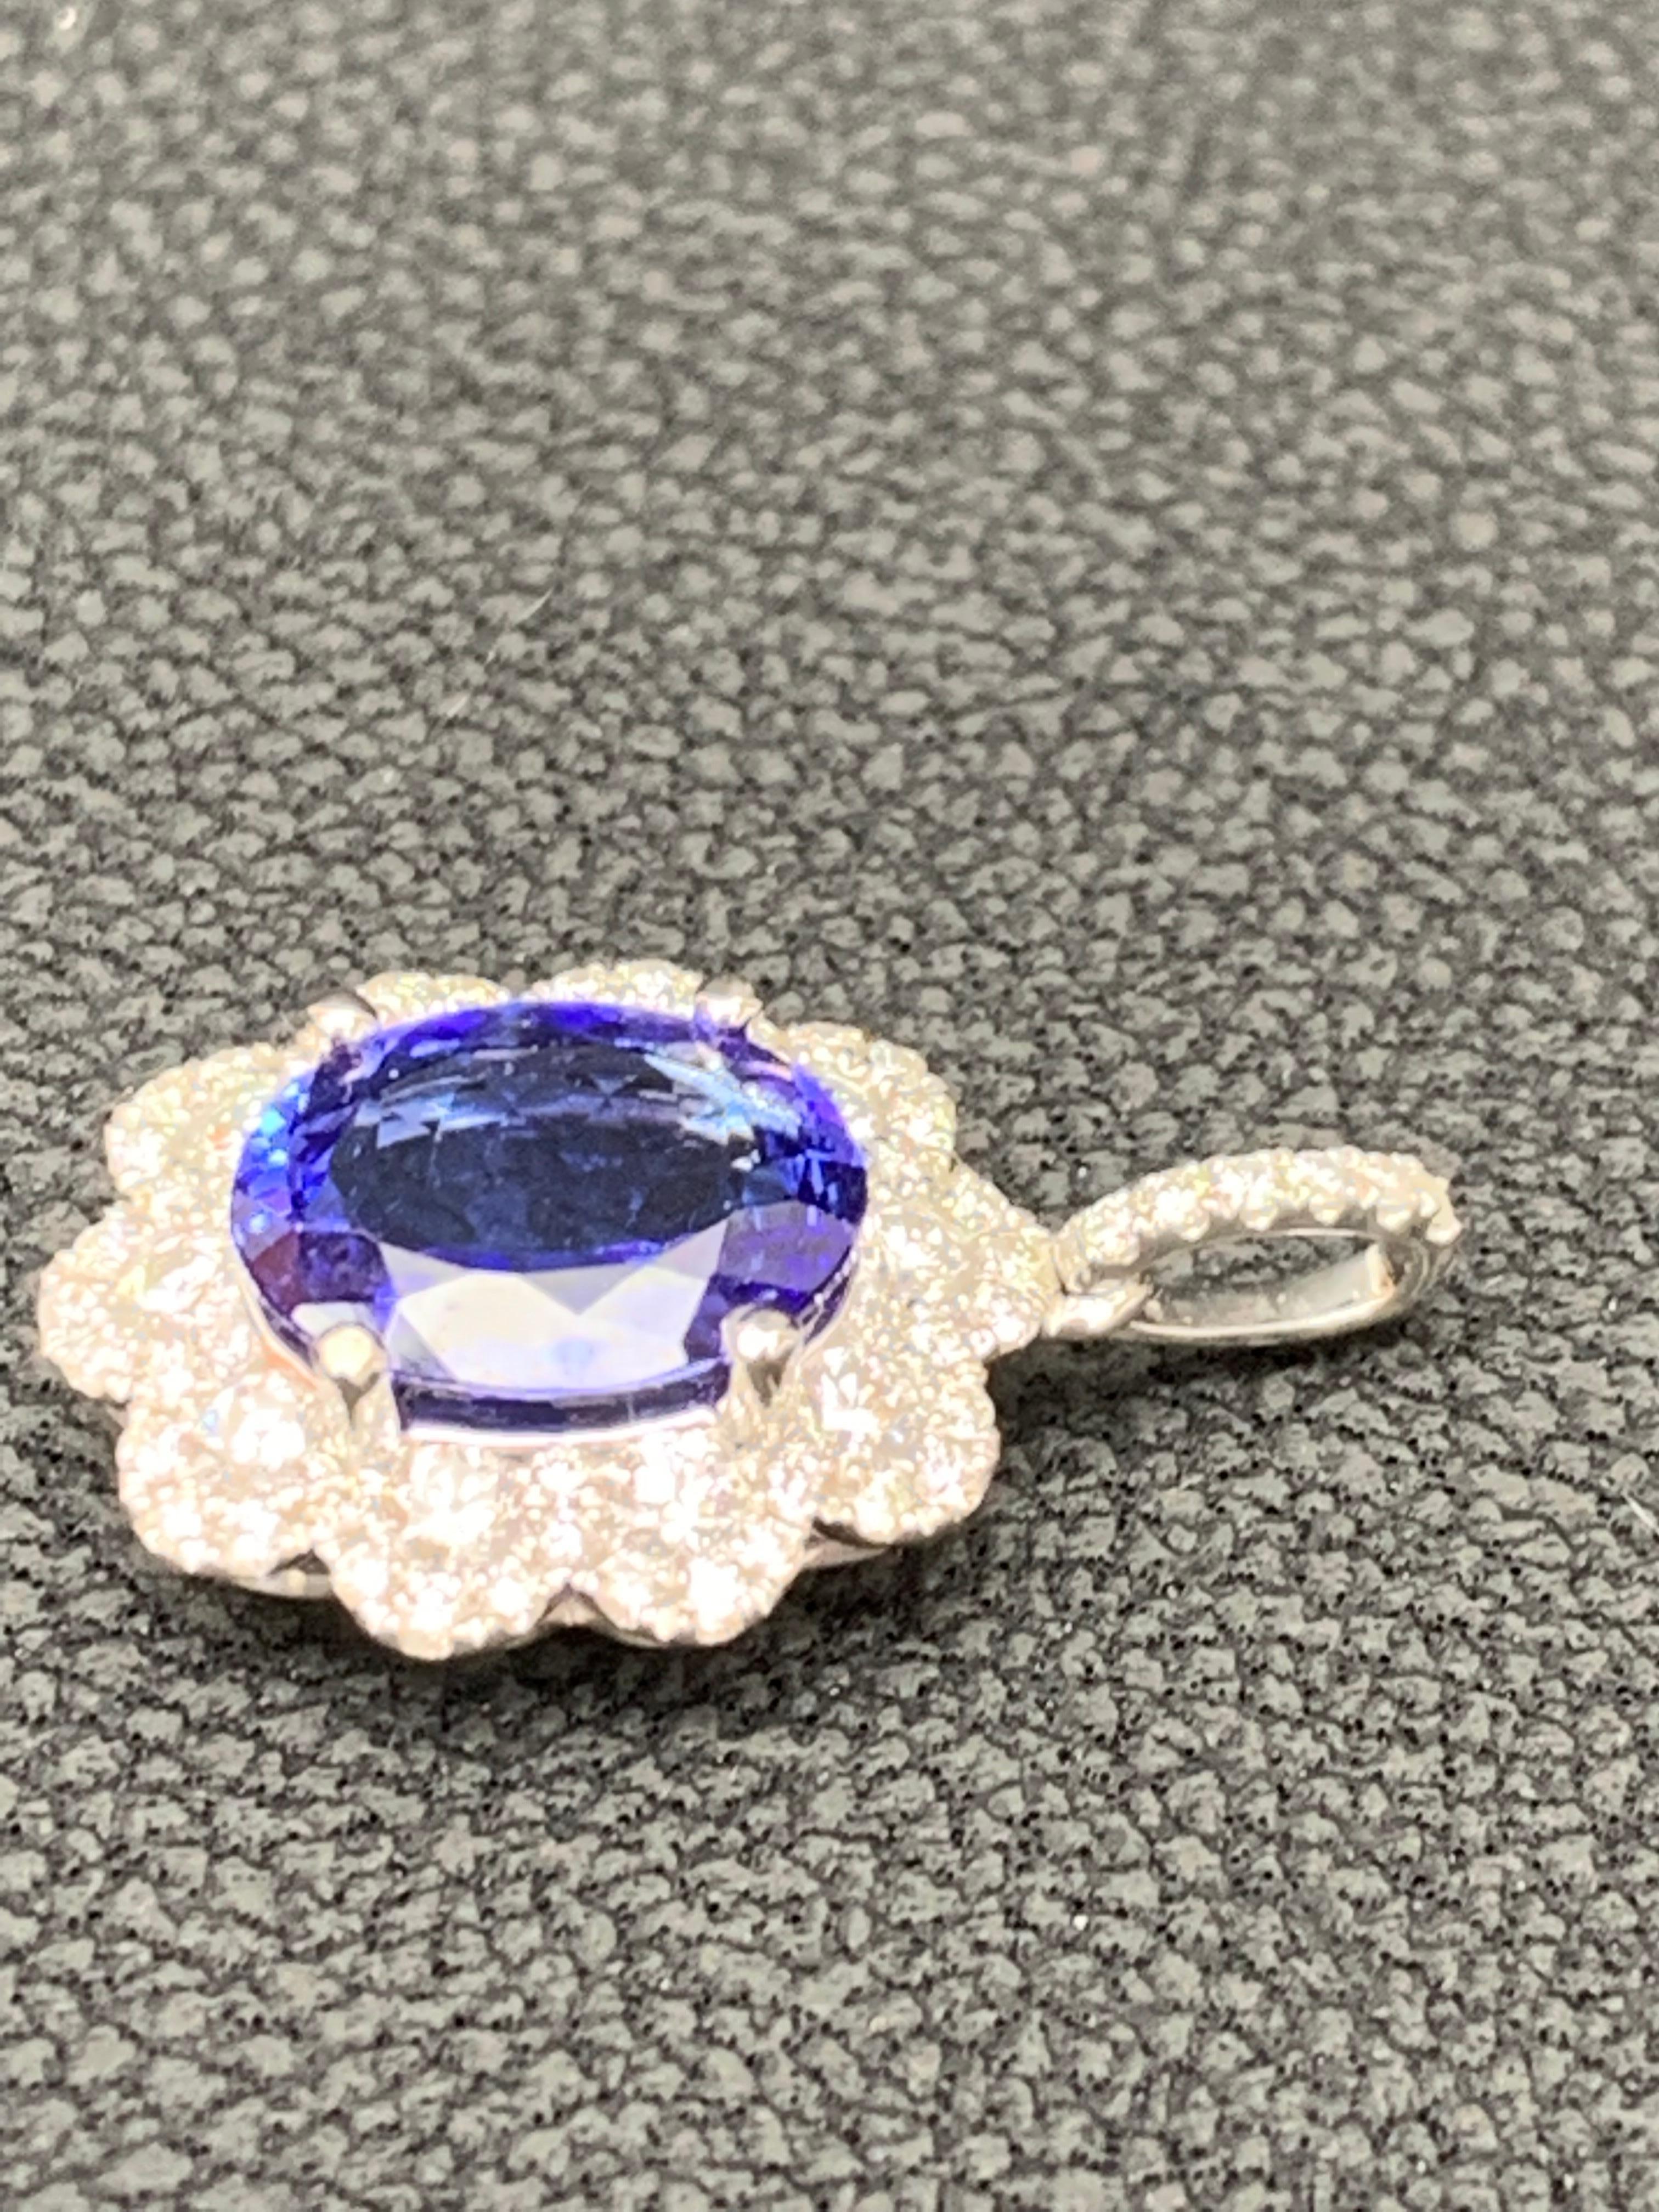 A simple floral motif pendant necklace showcasing a vibrant 2.45-carat oval cut tanzanite, surrounded by 0.74 carats of 62 accent round diamonds. Made in 18 karats white gold.

Style available in different price ranges. Prices are based on your